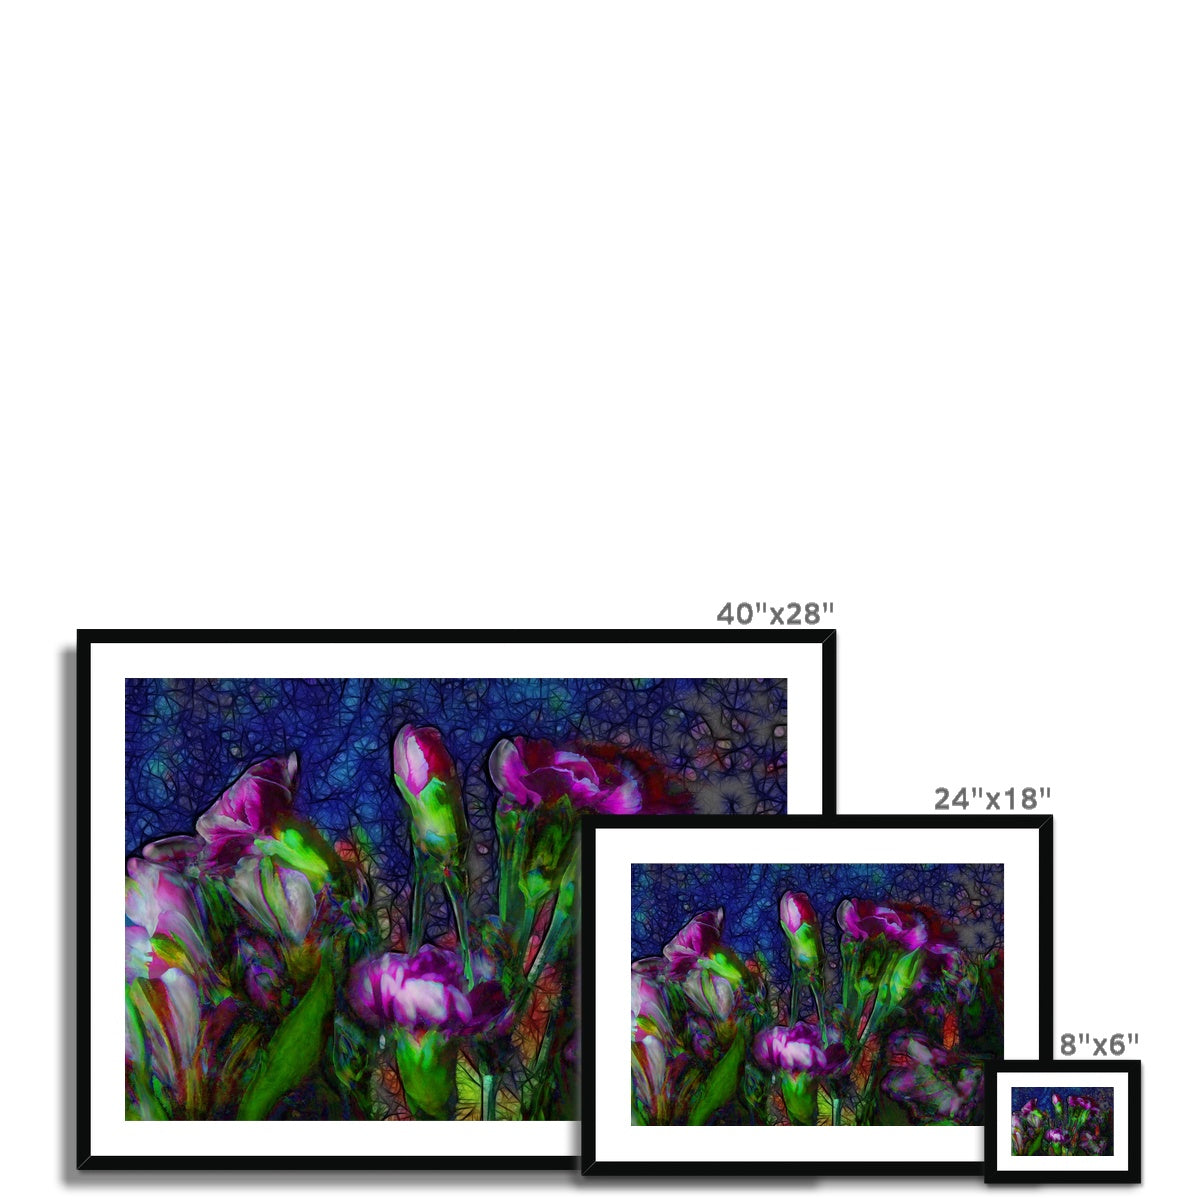 Abstract Pink Carnations Framed & Mounted Print